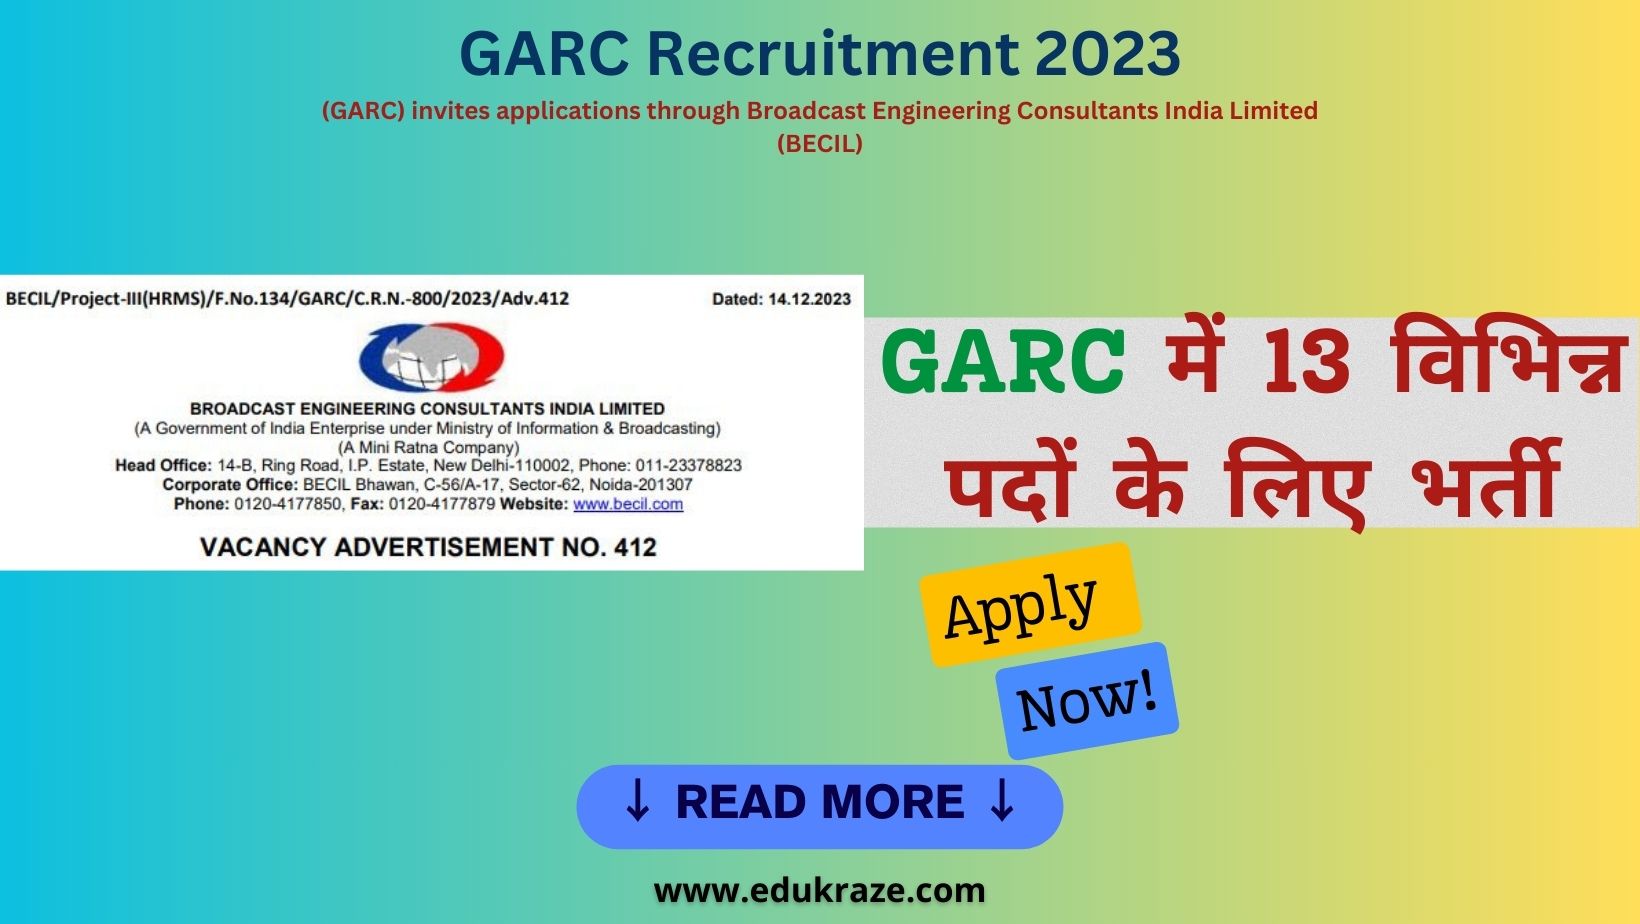 GARC Recruitment 2023 out for 13 Vacancies at BECIL